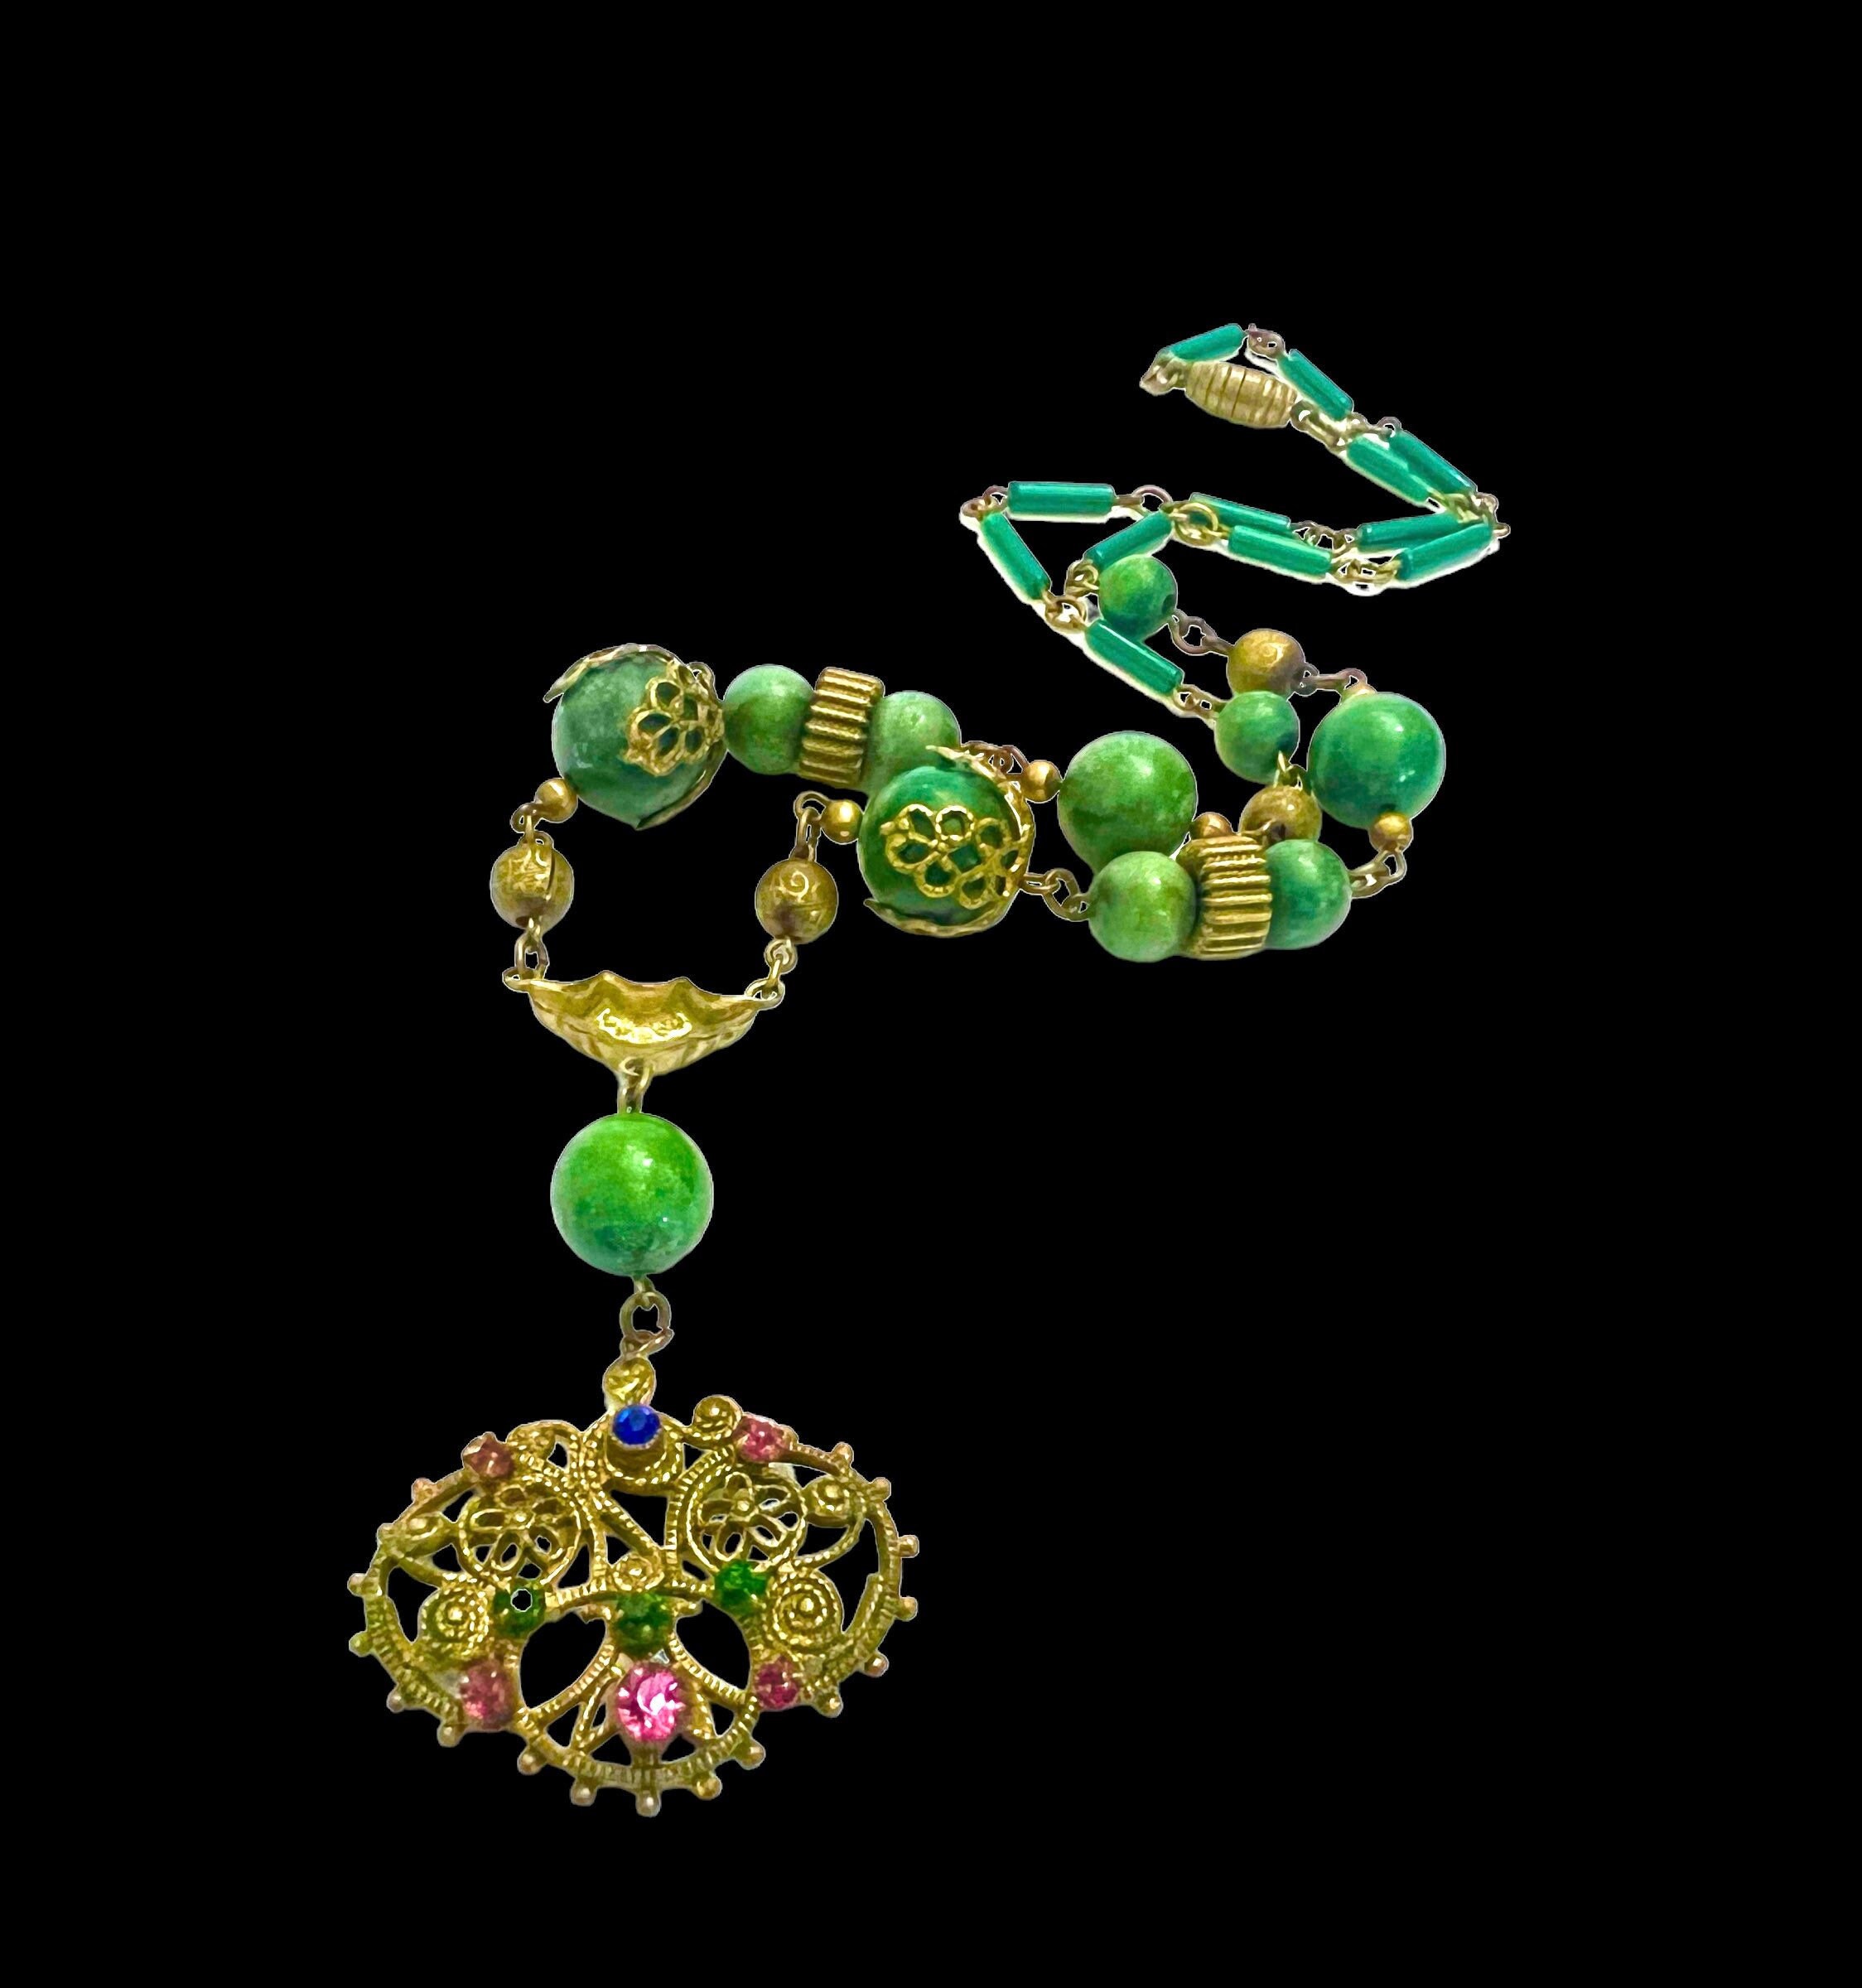 Czech Glass Pendant Necklace with Artisan Flower Beads, Mint Green and Champagne 32 Inches / 3 Inches